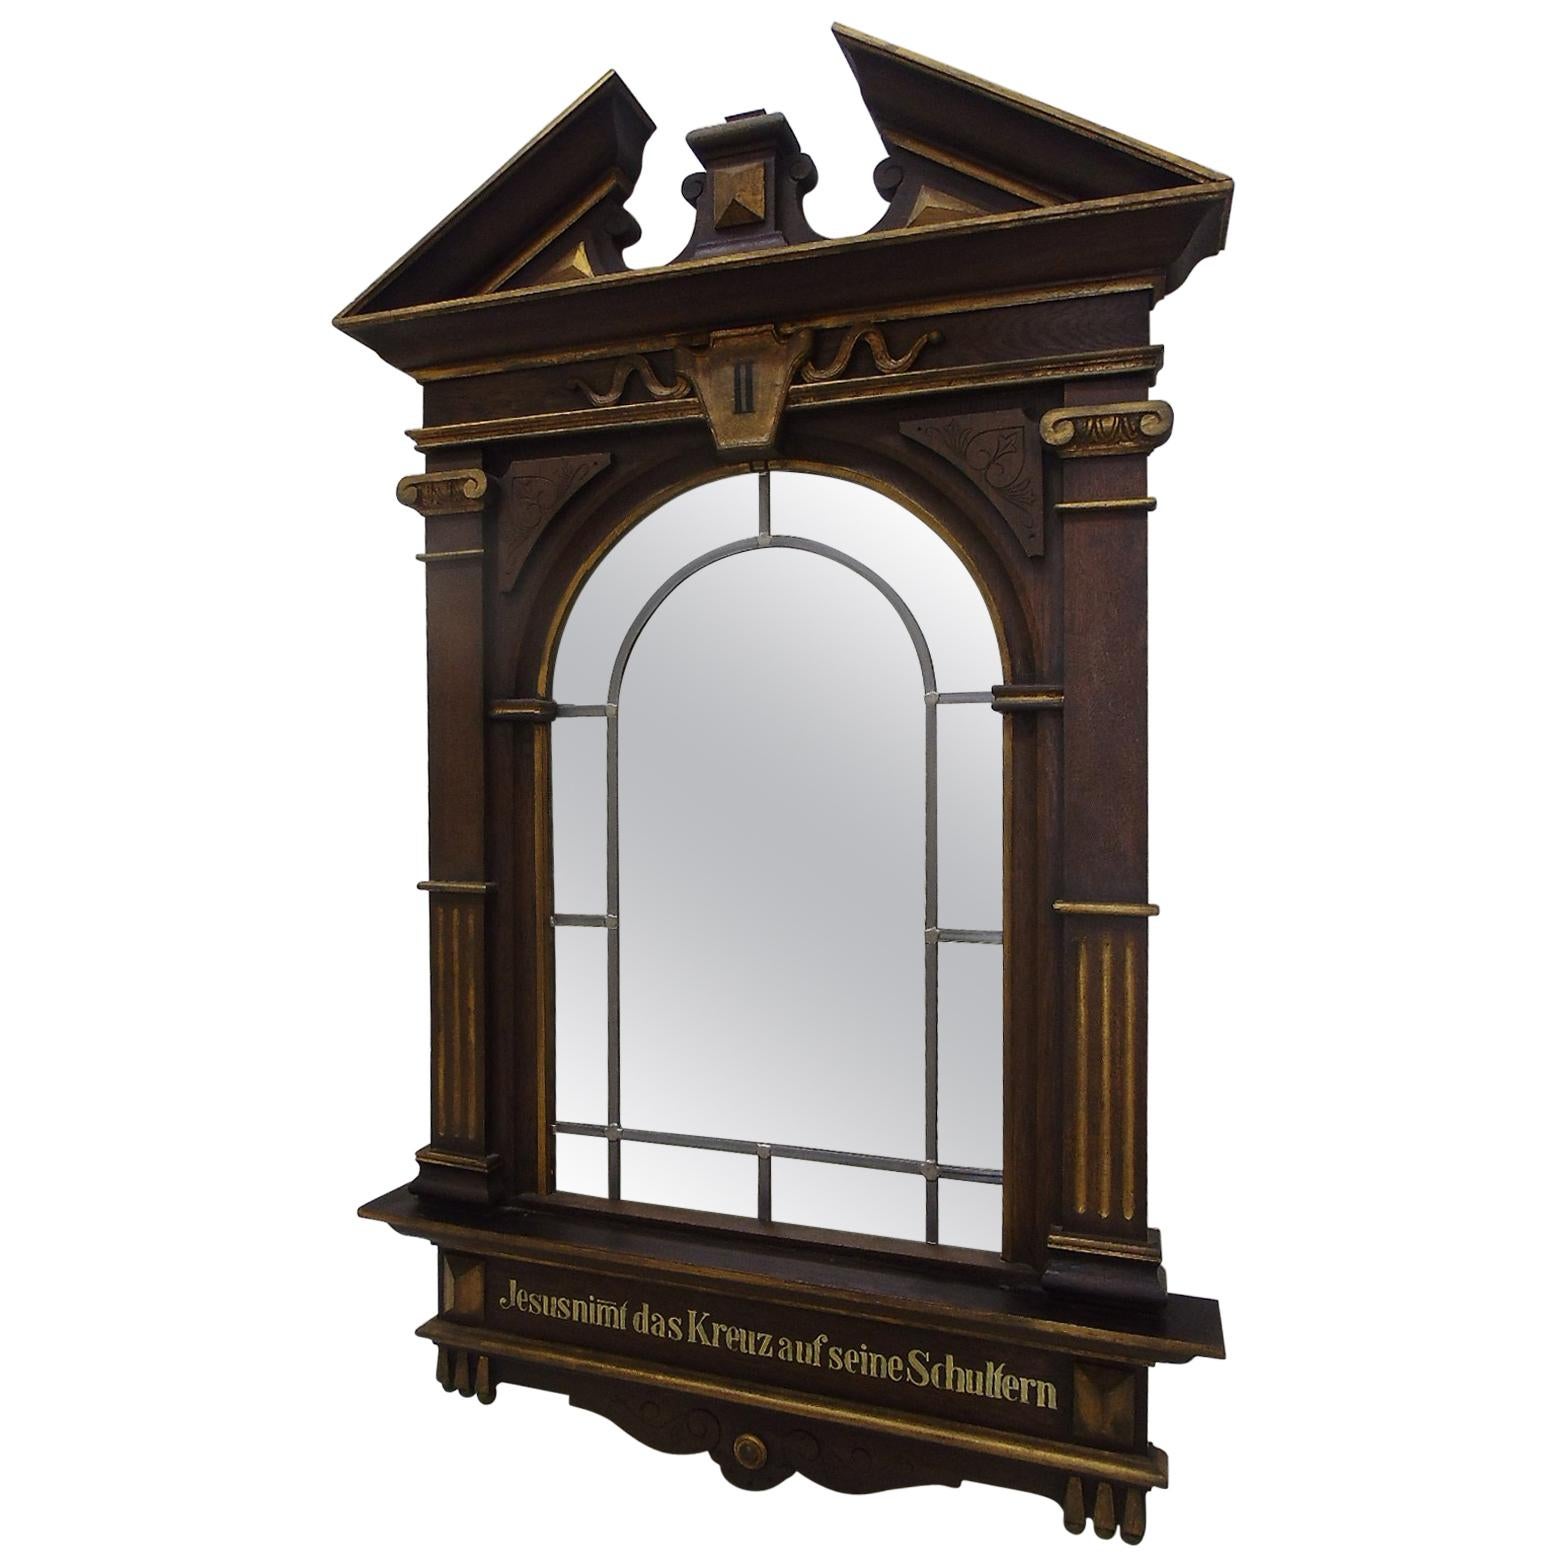 1870s Sacral Way of the Cross Window from Germany For Sale